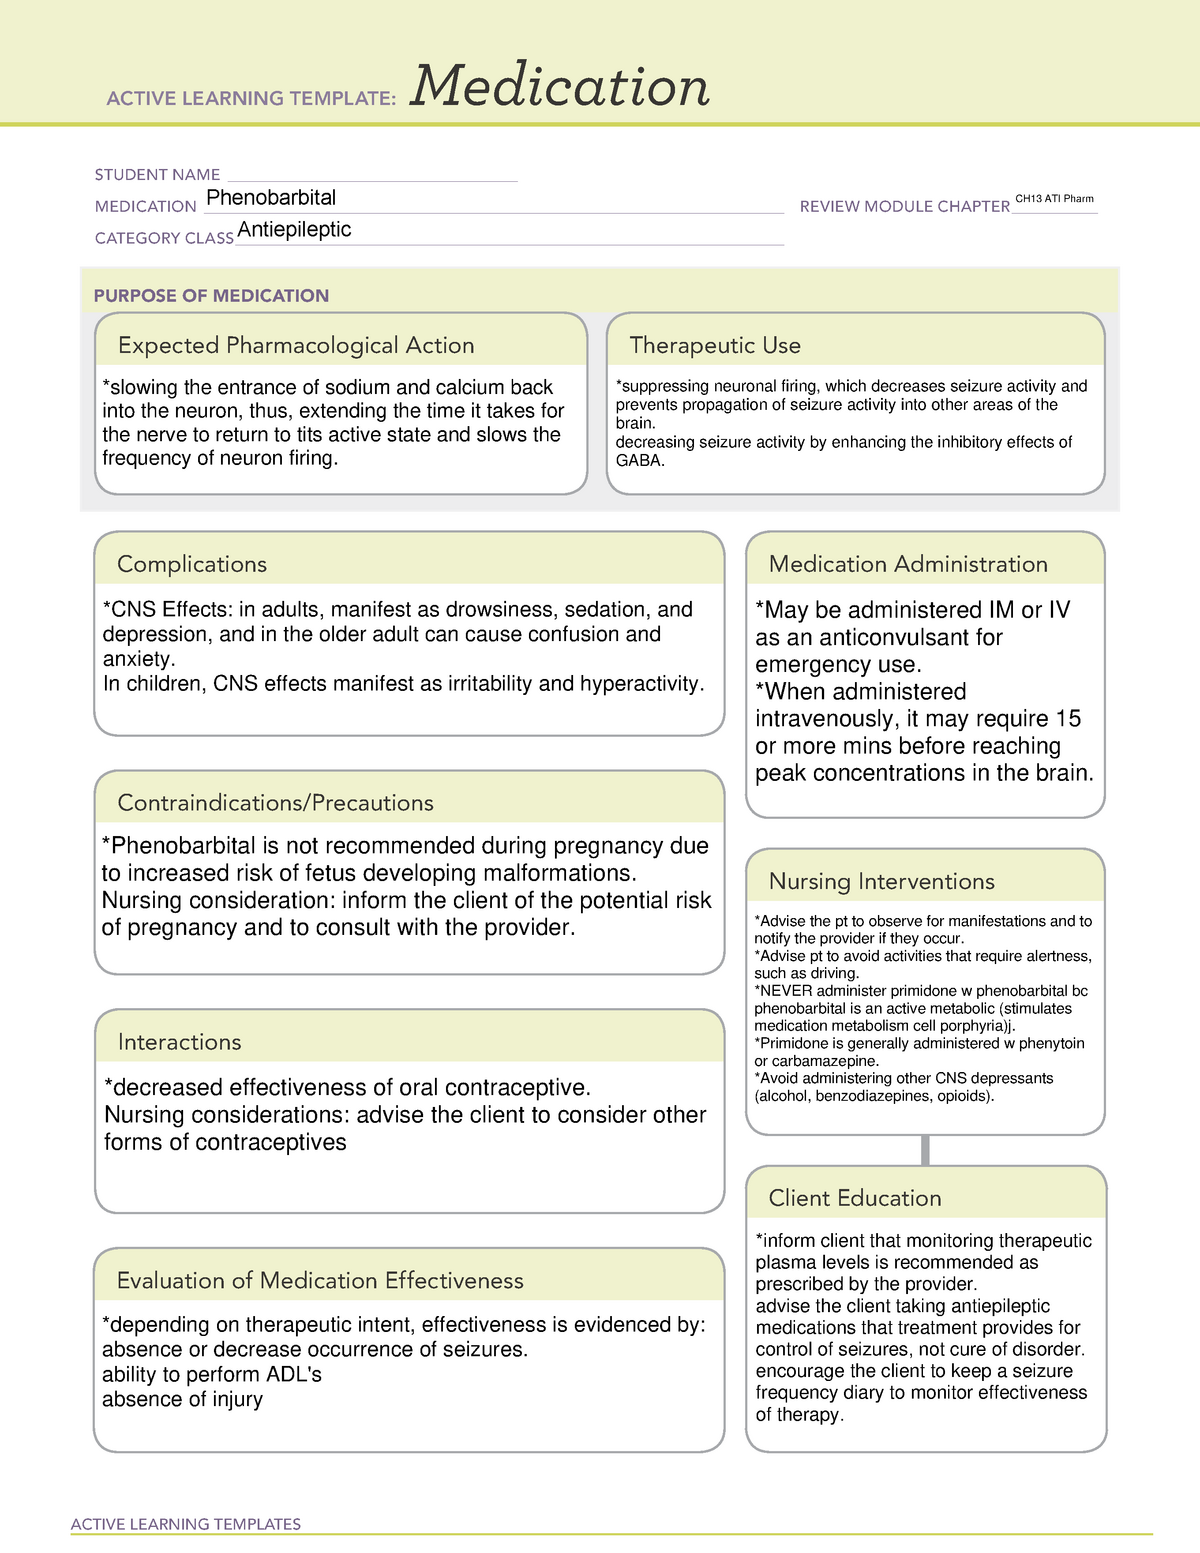 ati-active-learning-template